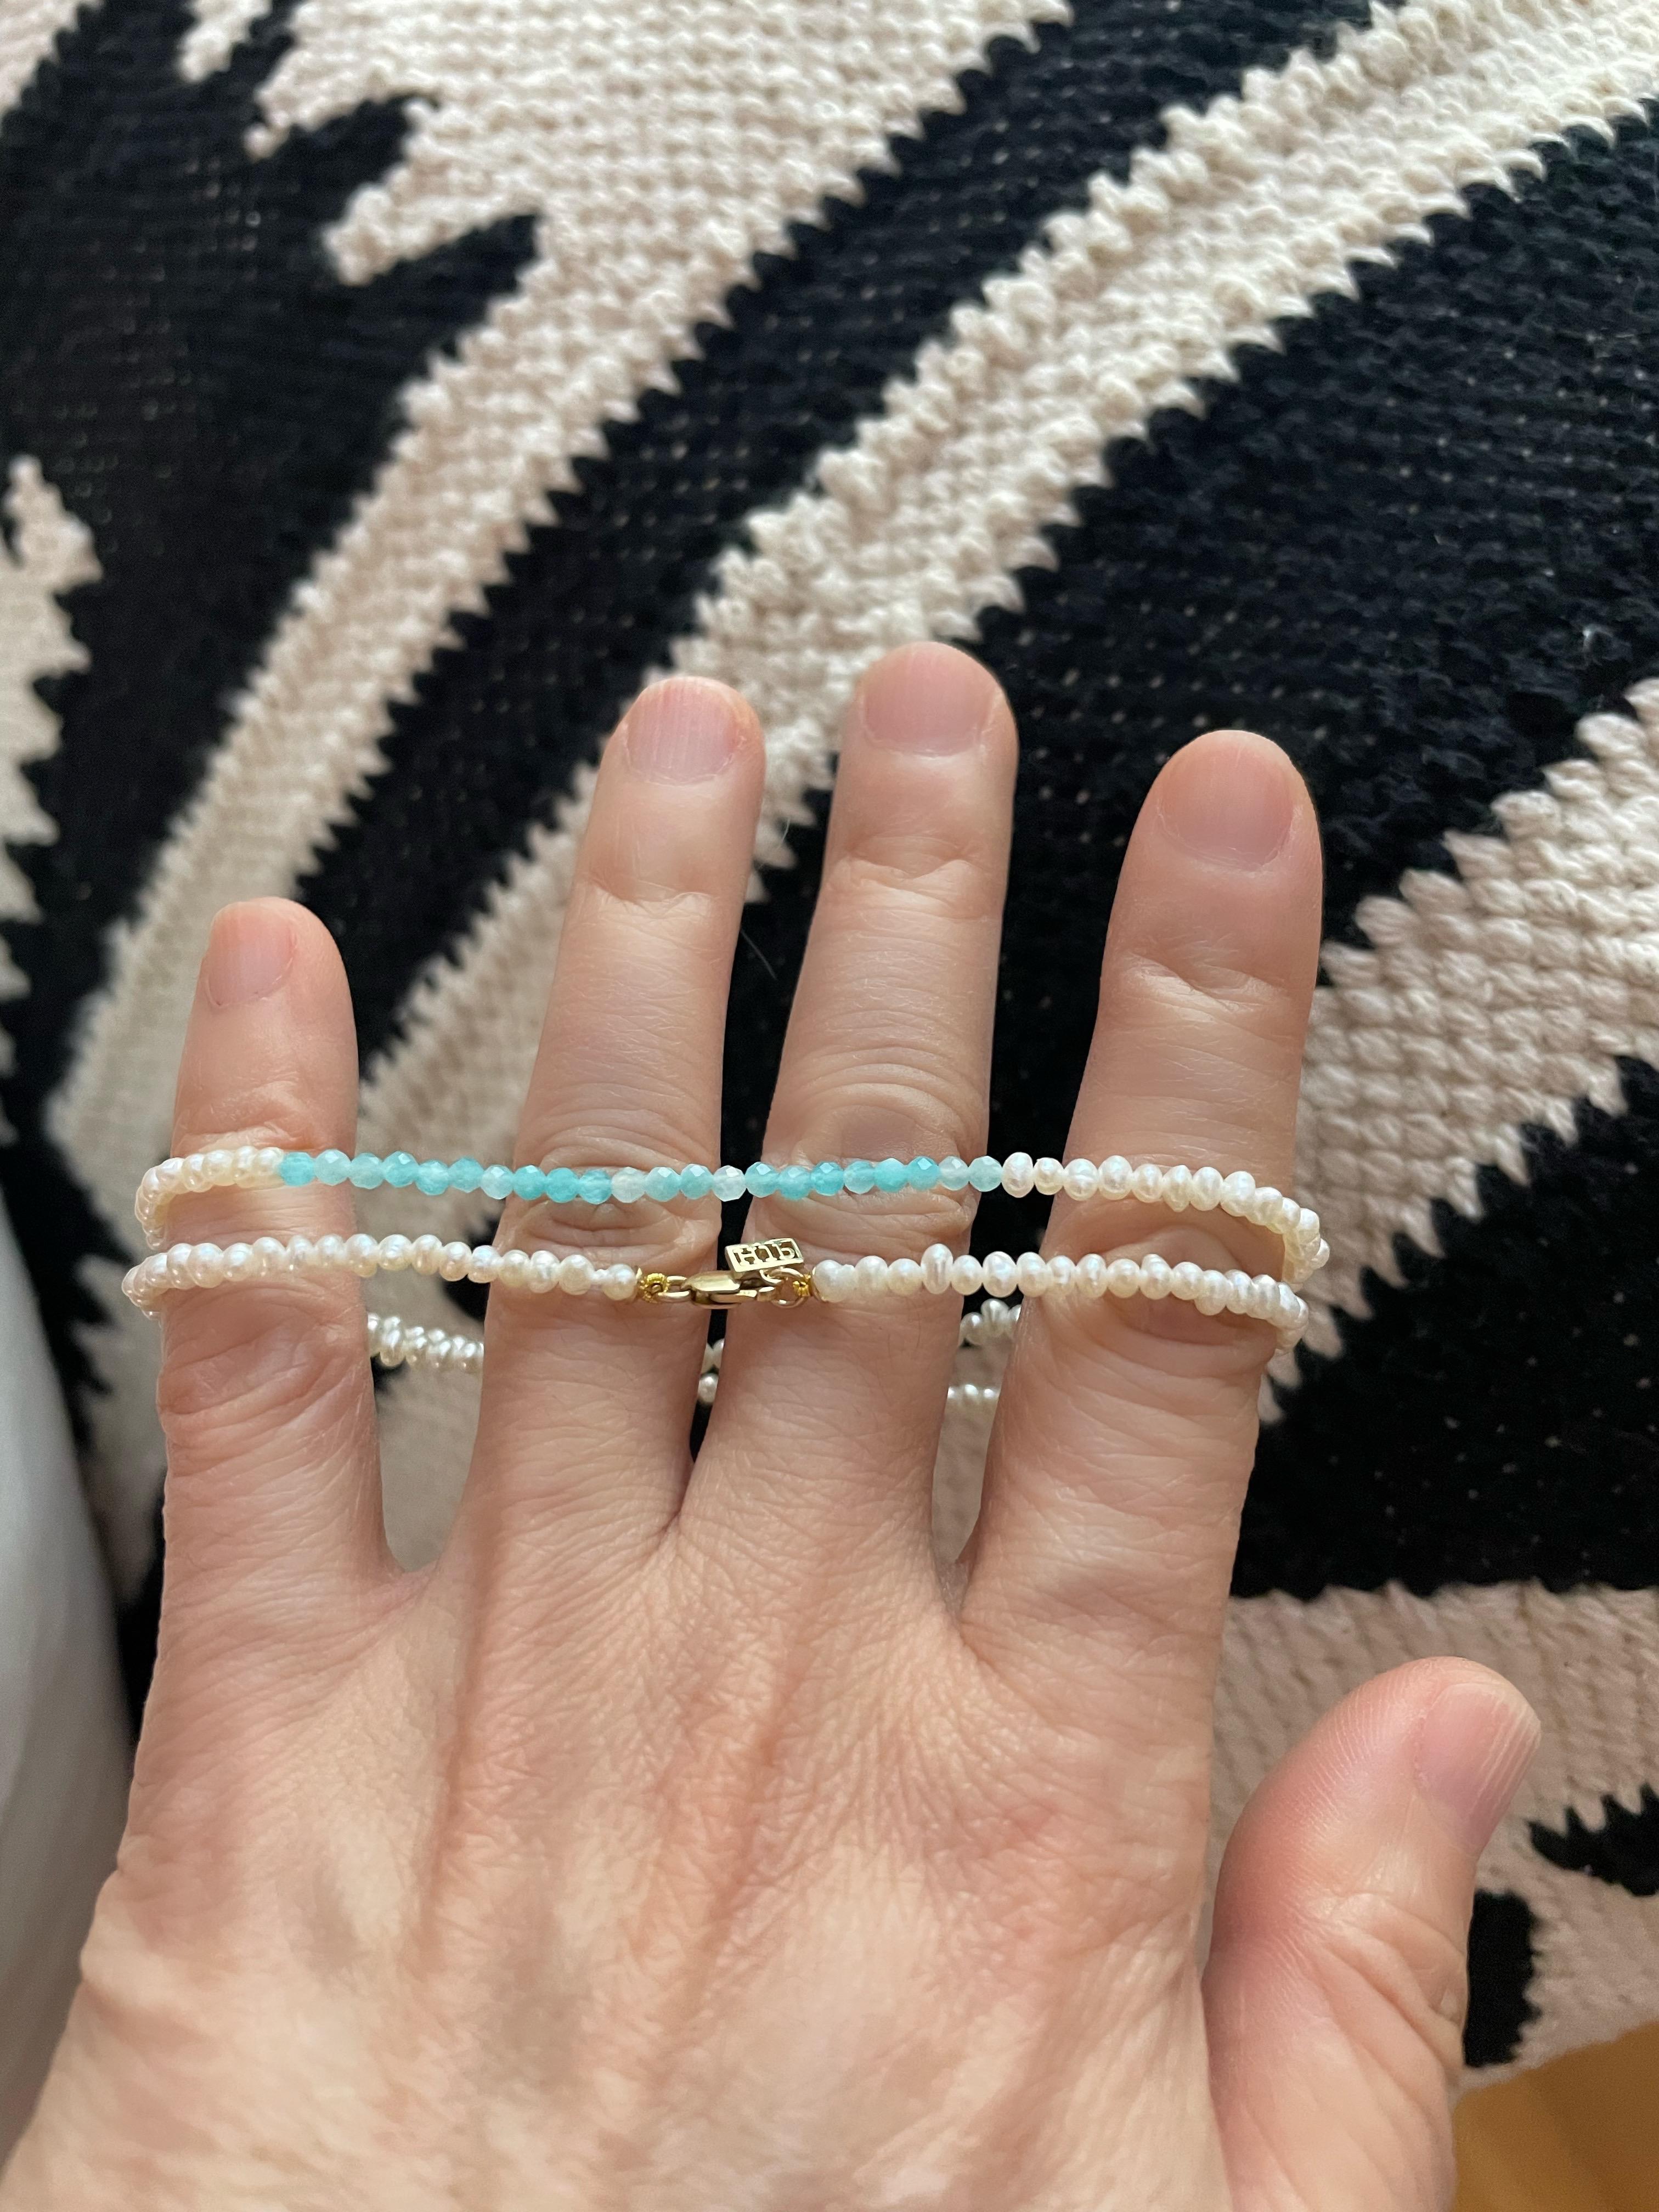 Contemporary 14K Karat Yellow Gold Seedpearl Choker with Amazonite Stones Hi June Parker For Sale